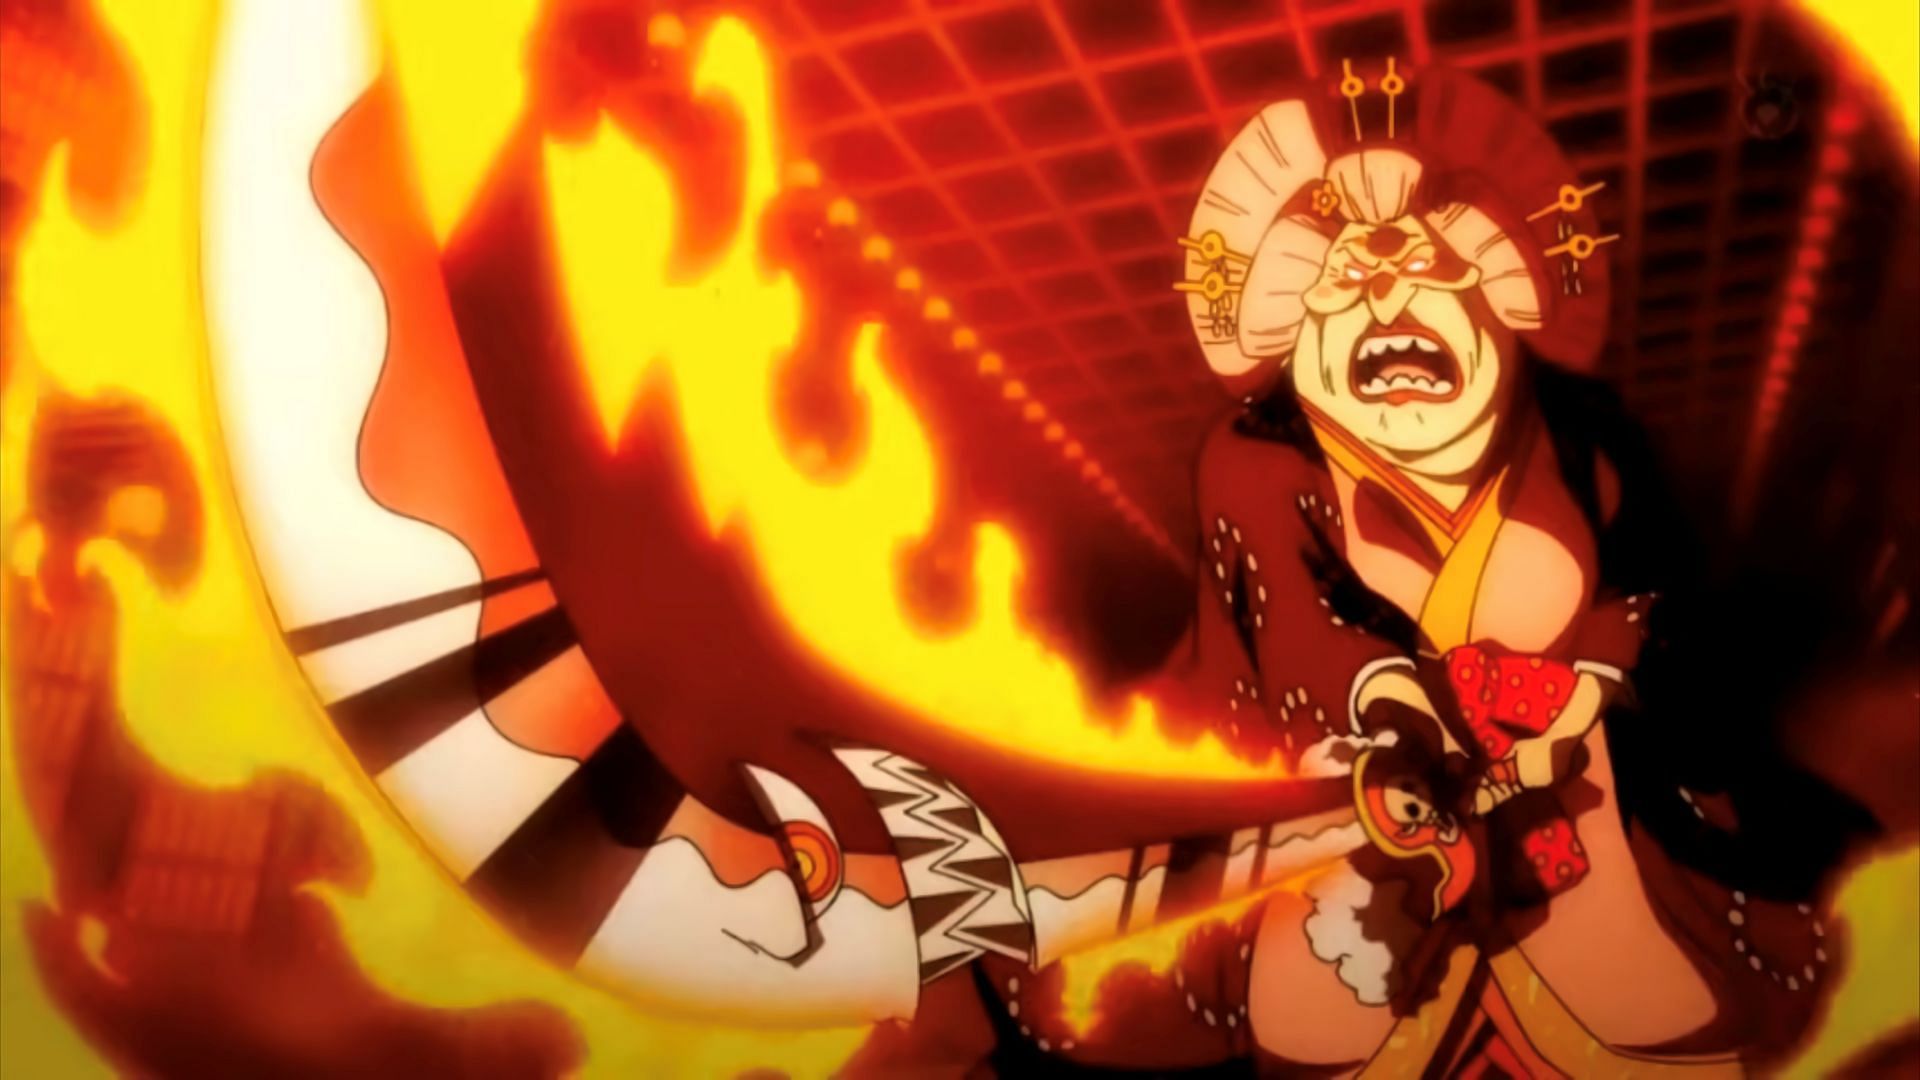 One Piece episode 1034: Zeus' sacrifice, Queen and Perospero join forces,  and Momonosuke learns about his father